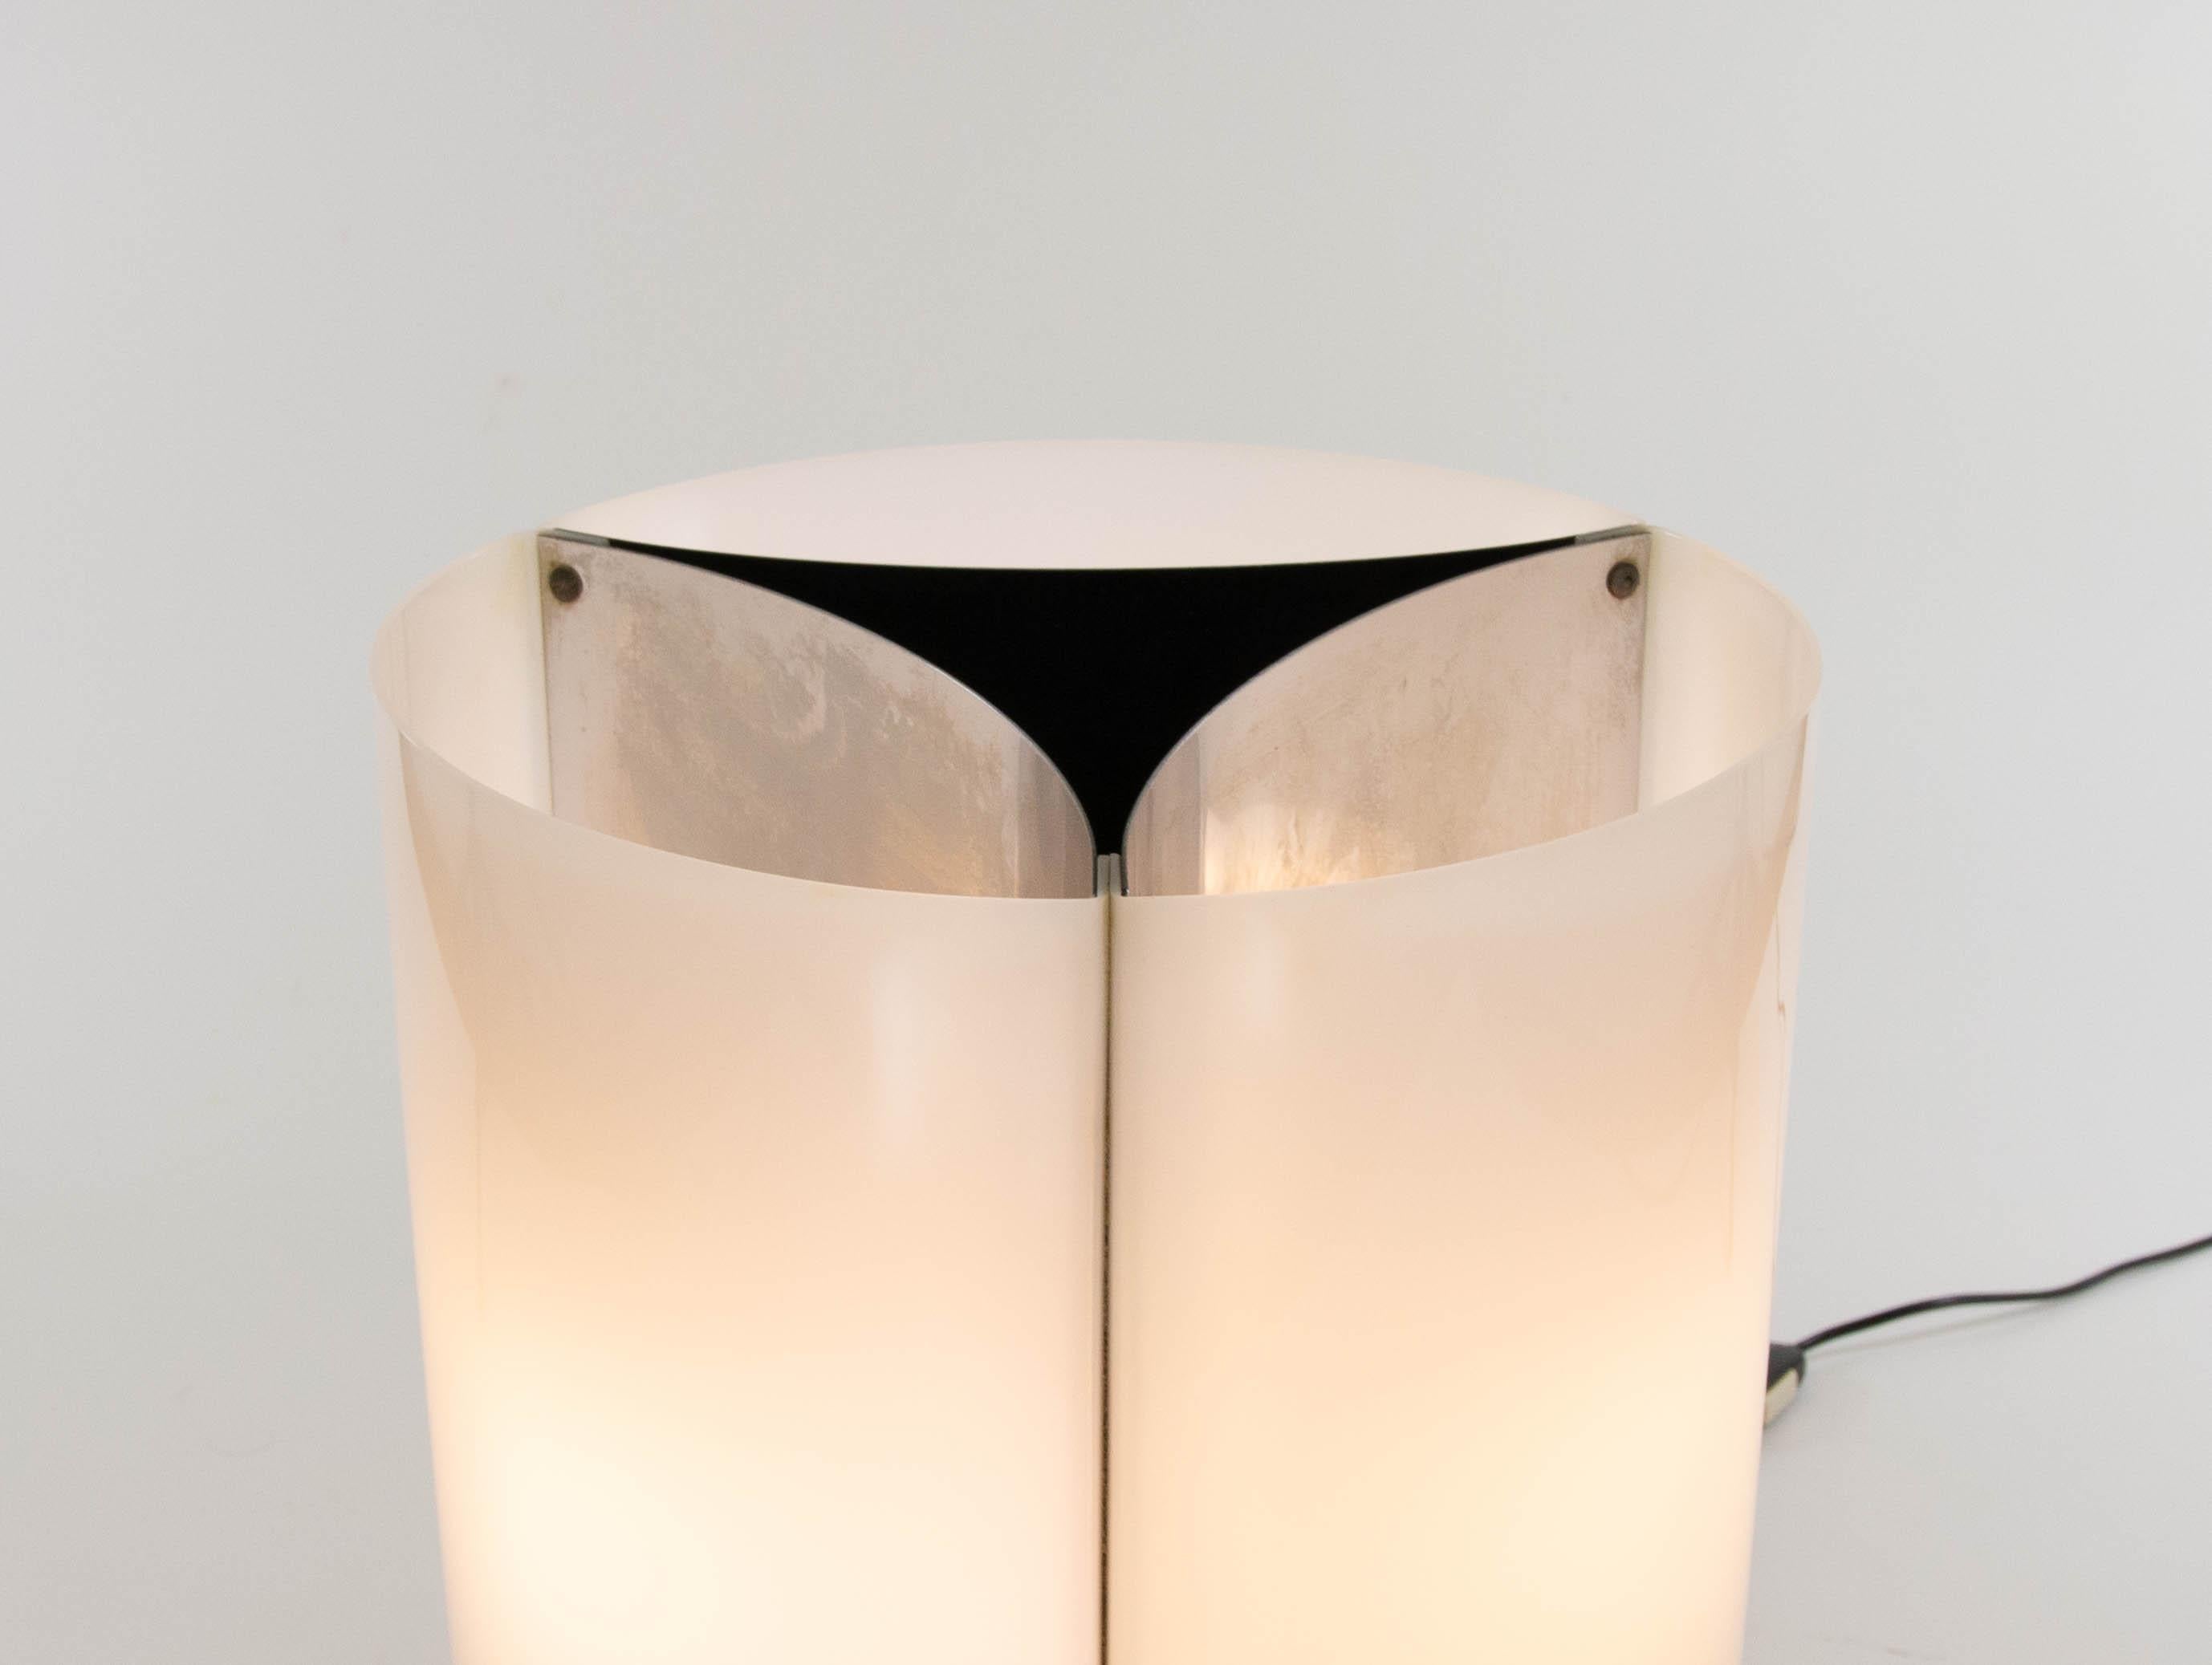 Italian Table Lamp Model No. 526 by Massimo Vignelli for Arteluce, 1965 For Sale